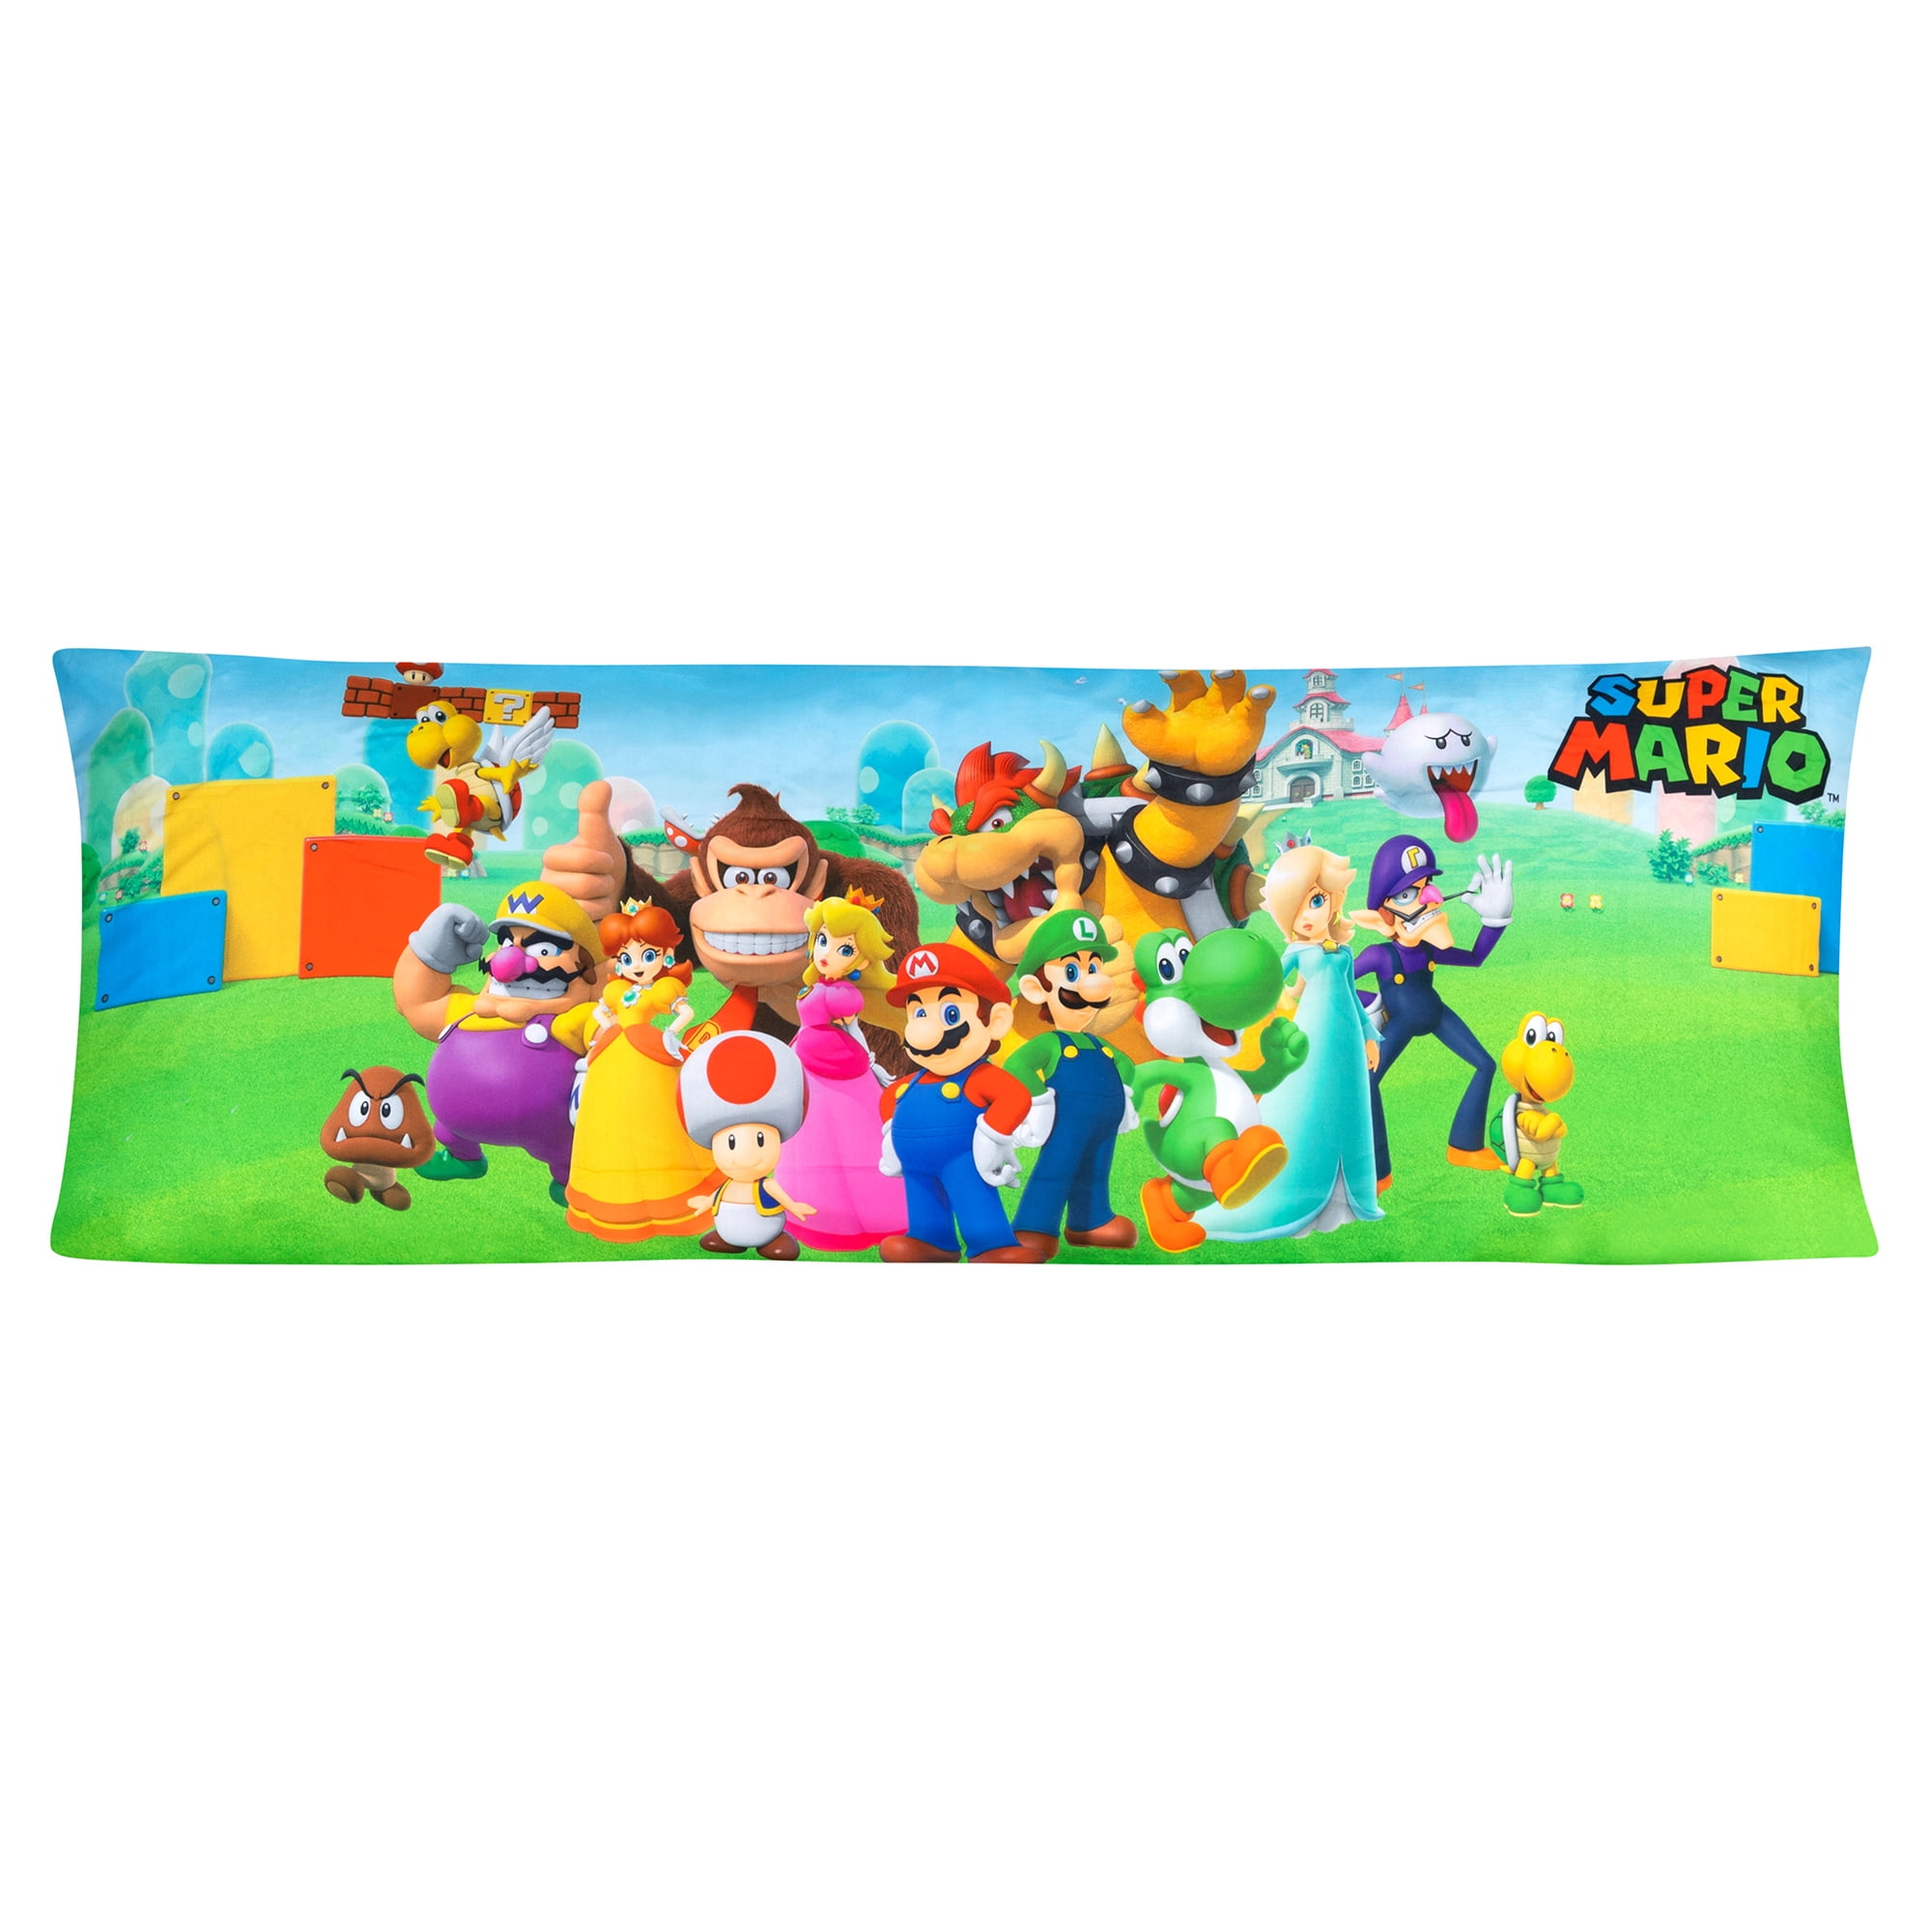 boys bedroom Kids Bedroom personalized pillow case Toddler Room Super Mario Brothers pillow case Baby Room Childrens Pillow Case birthday gift 